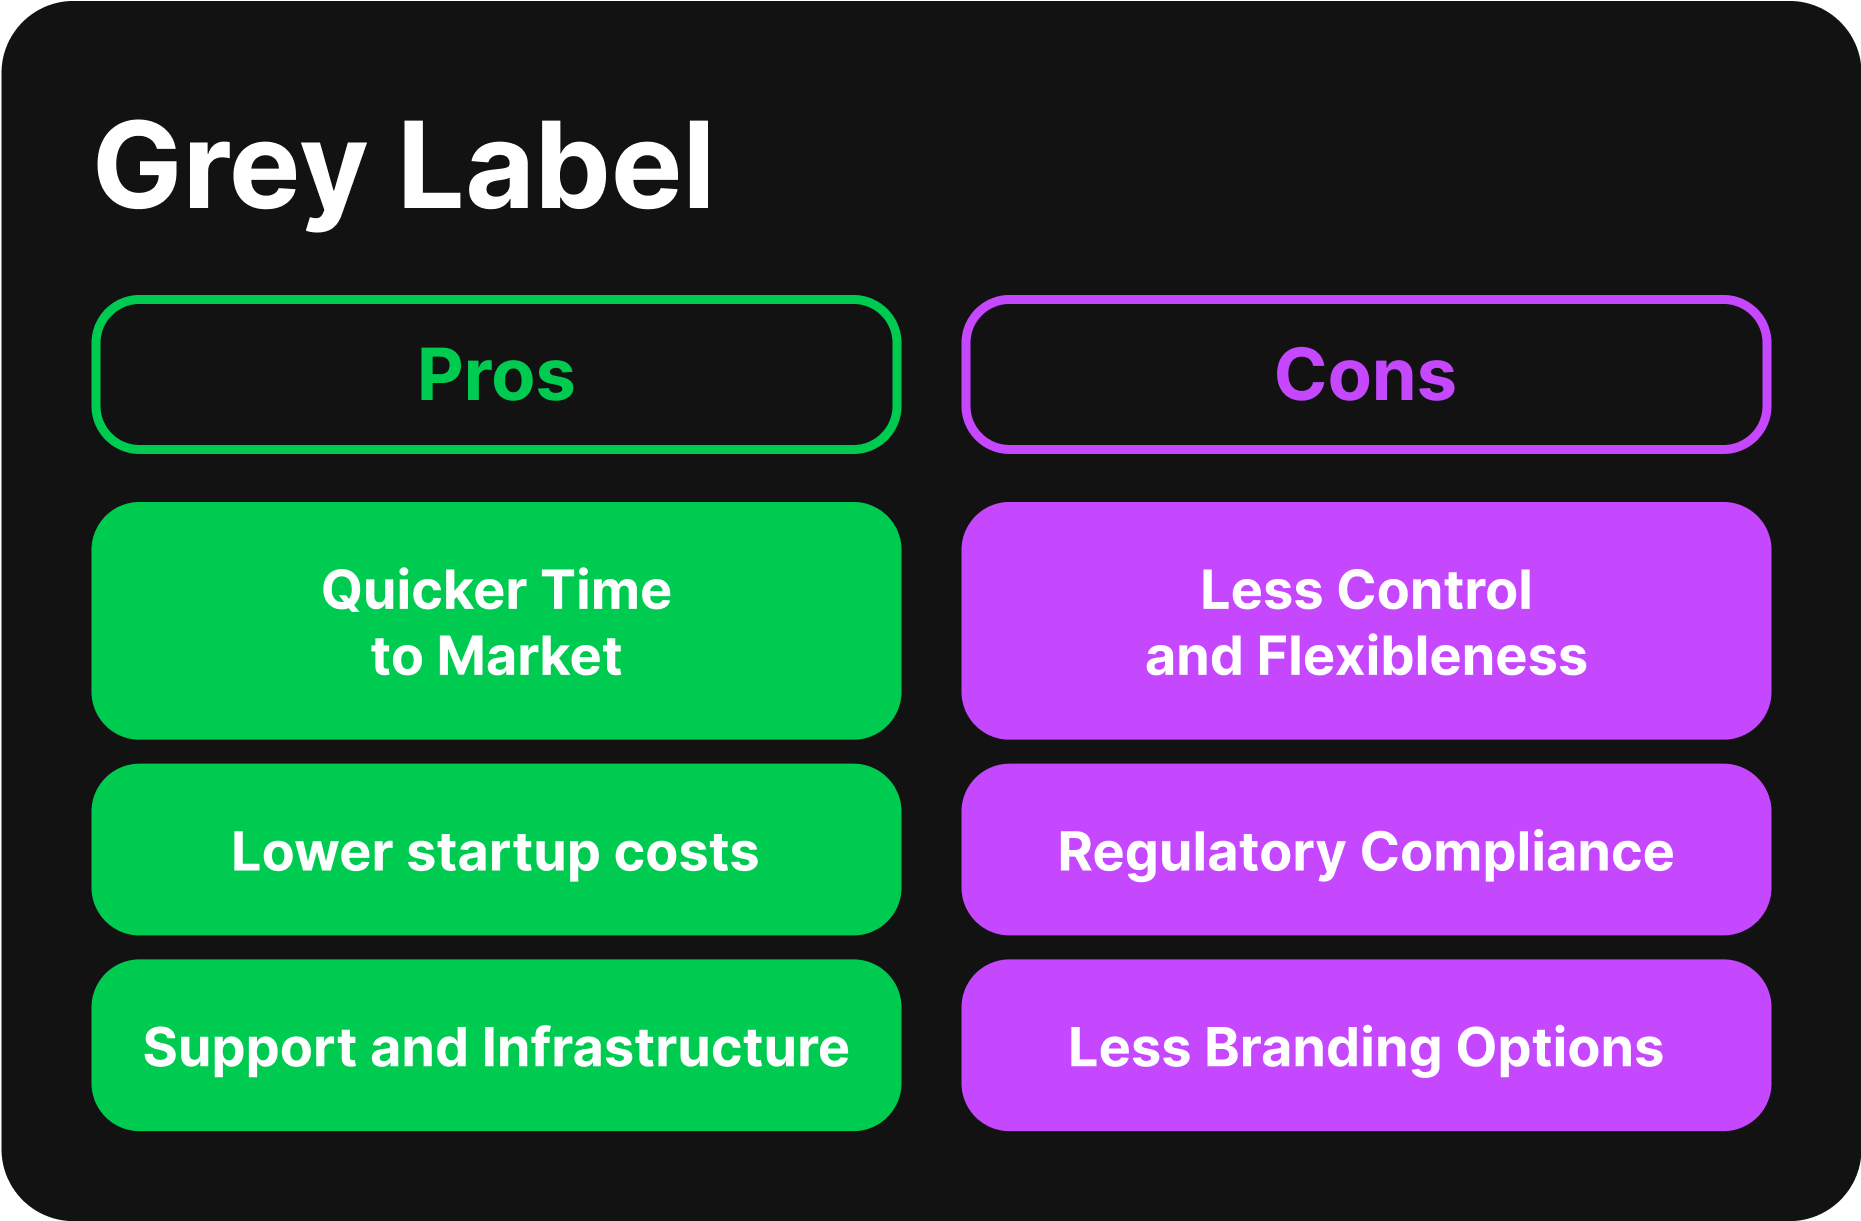 pros and cons of Grey Label